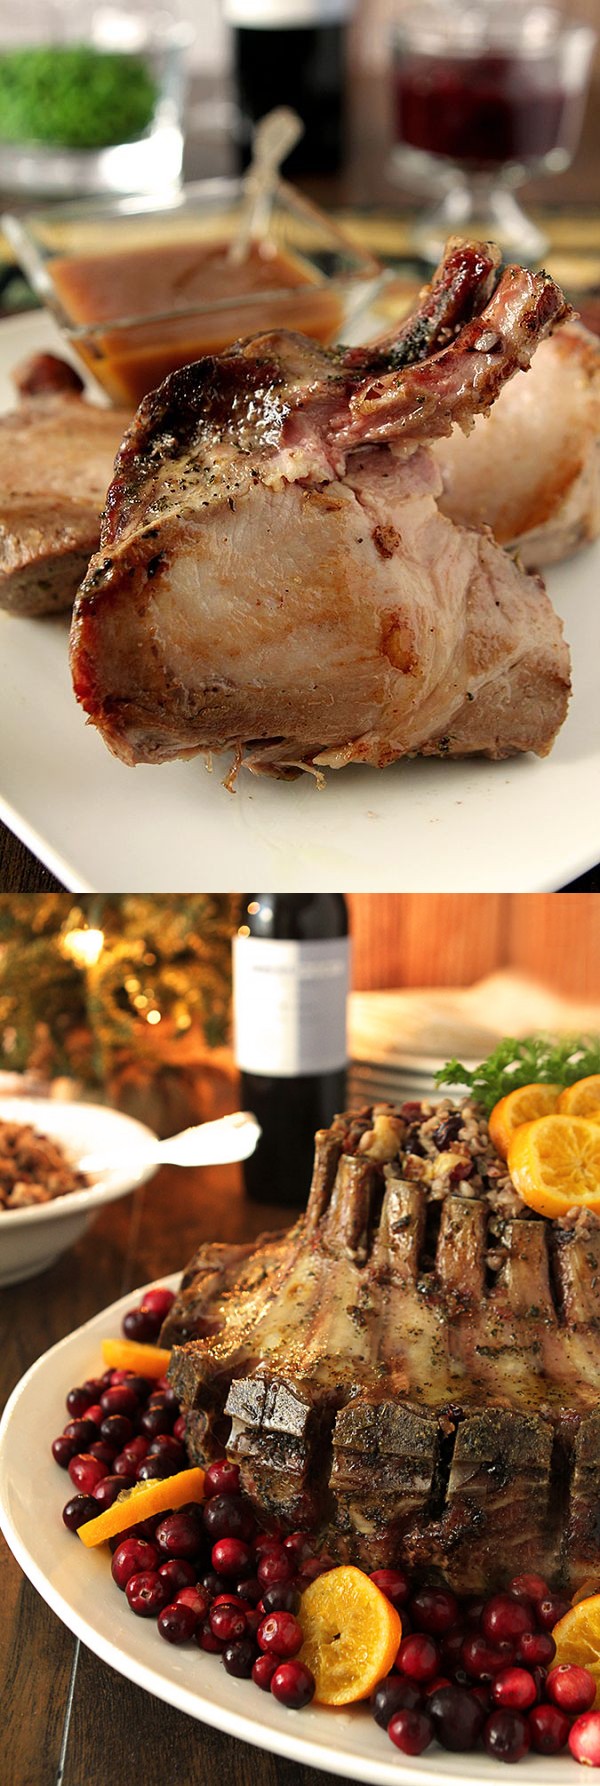 Crown Roast of Pork with Wild Rice Stuffing and Caramelized Orange Sauce